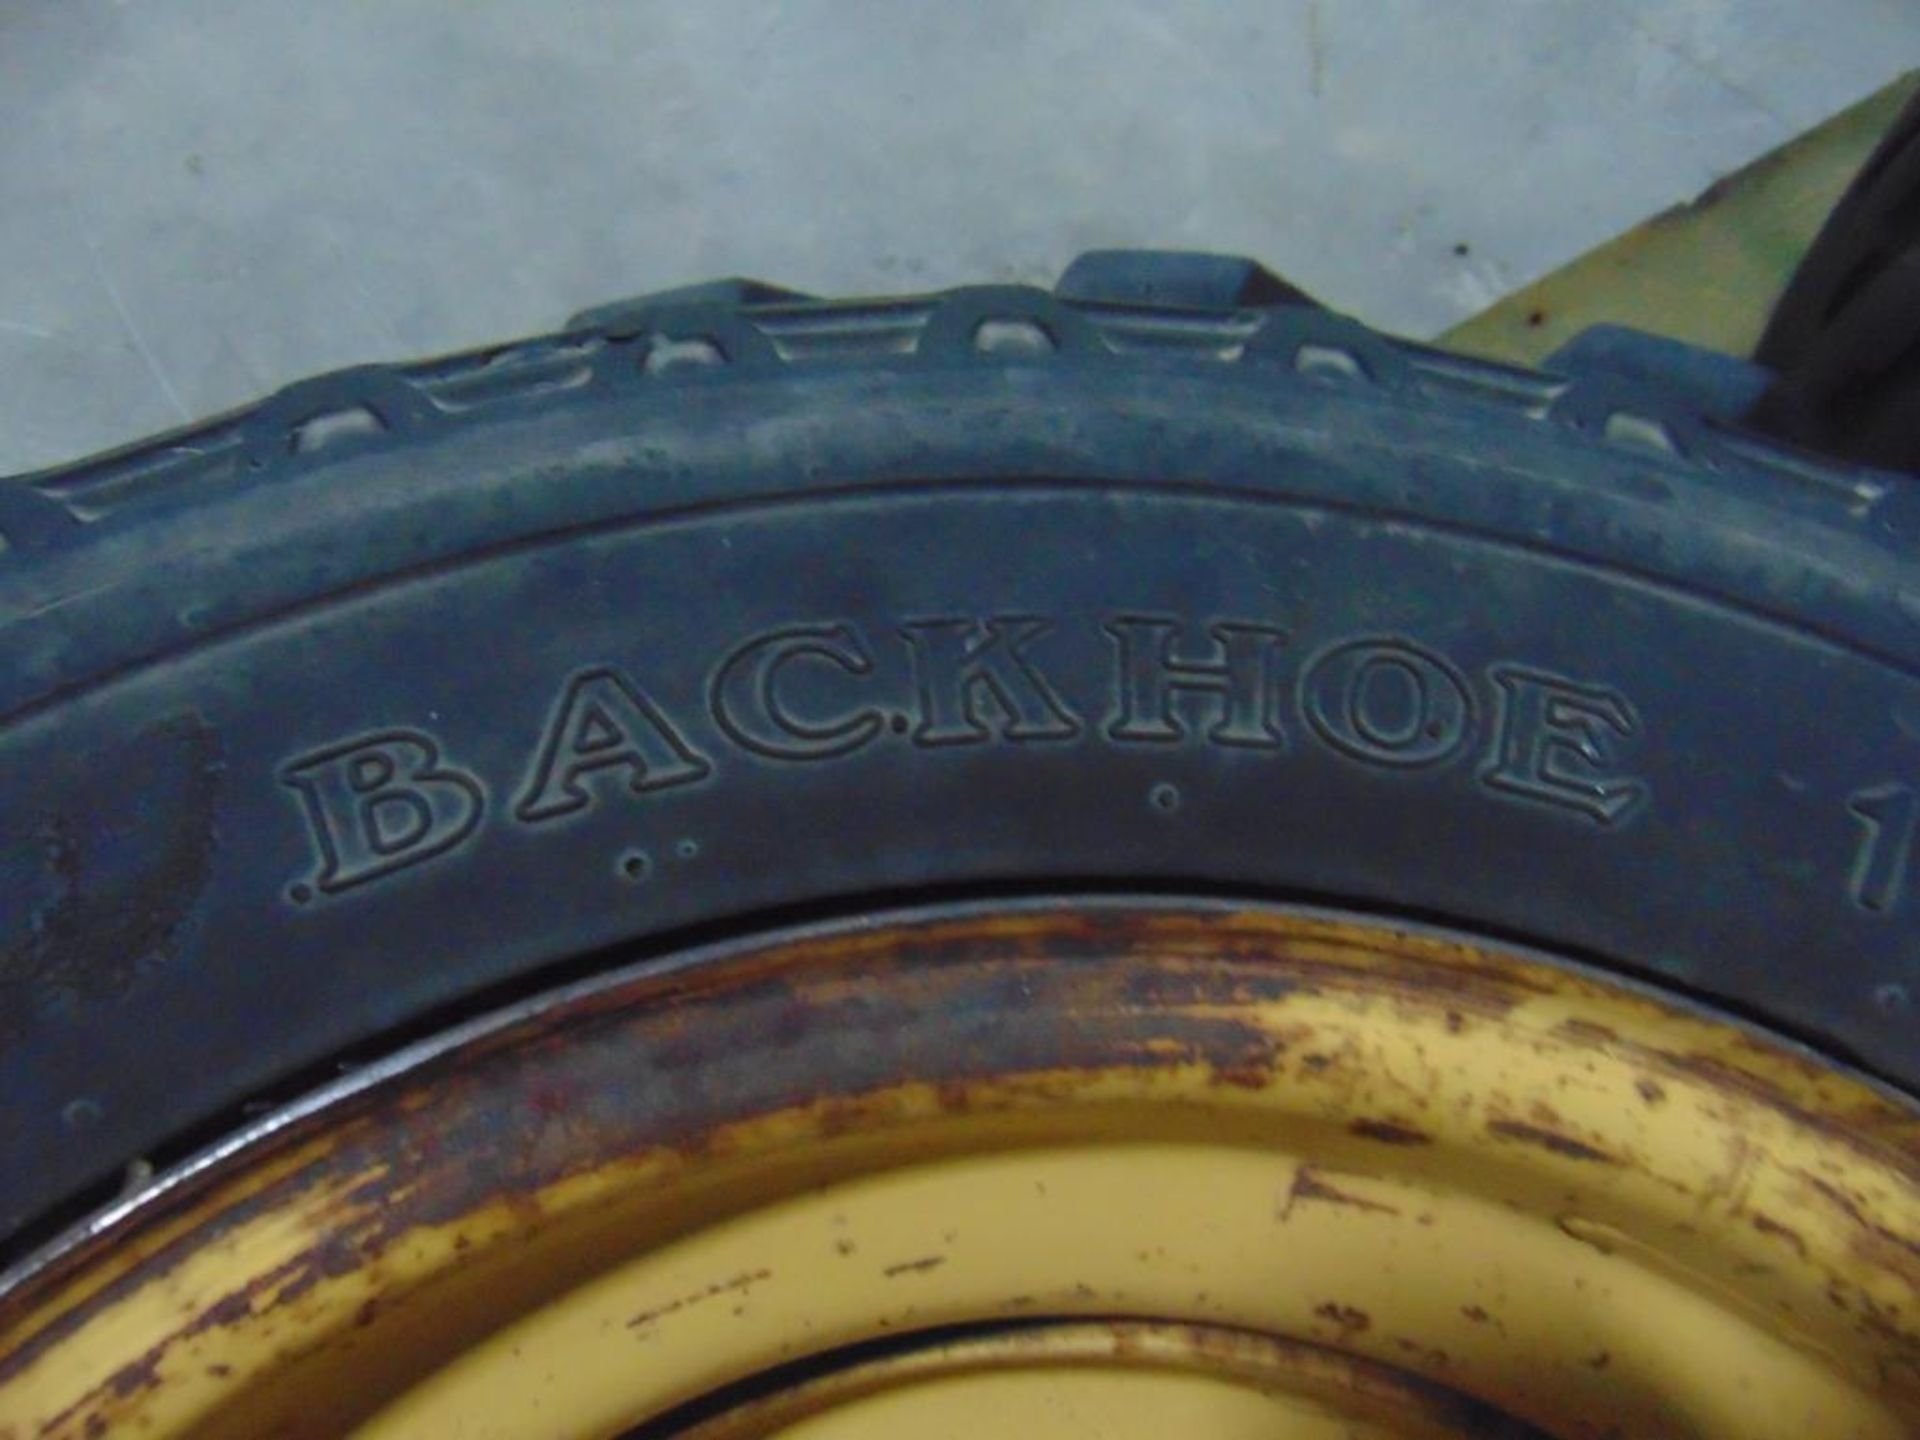 Lot of Tires and Rims* - Image 14 of 24